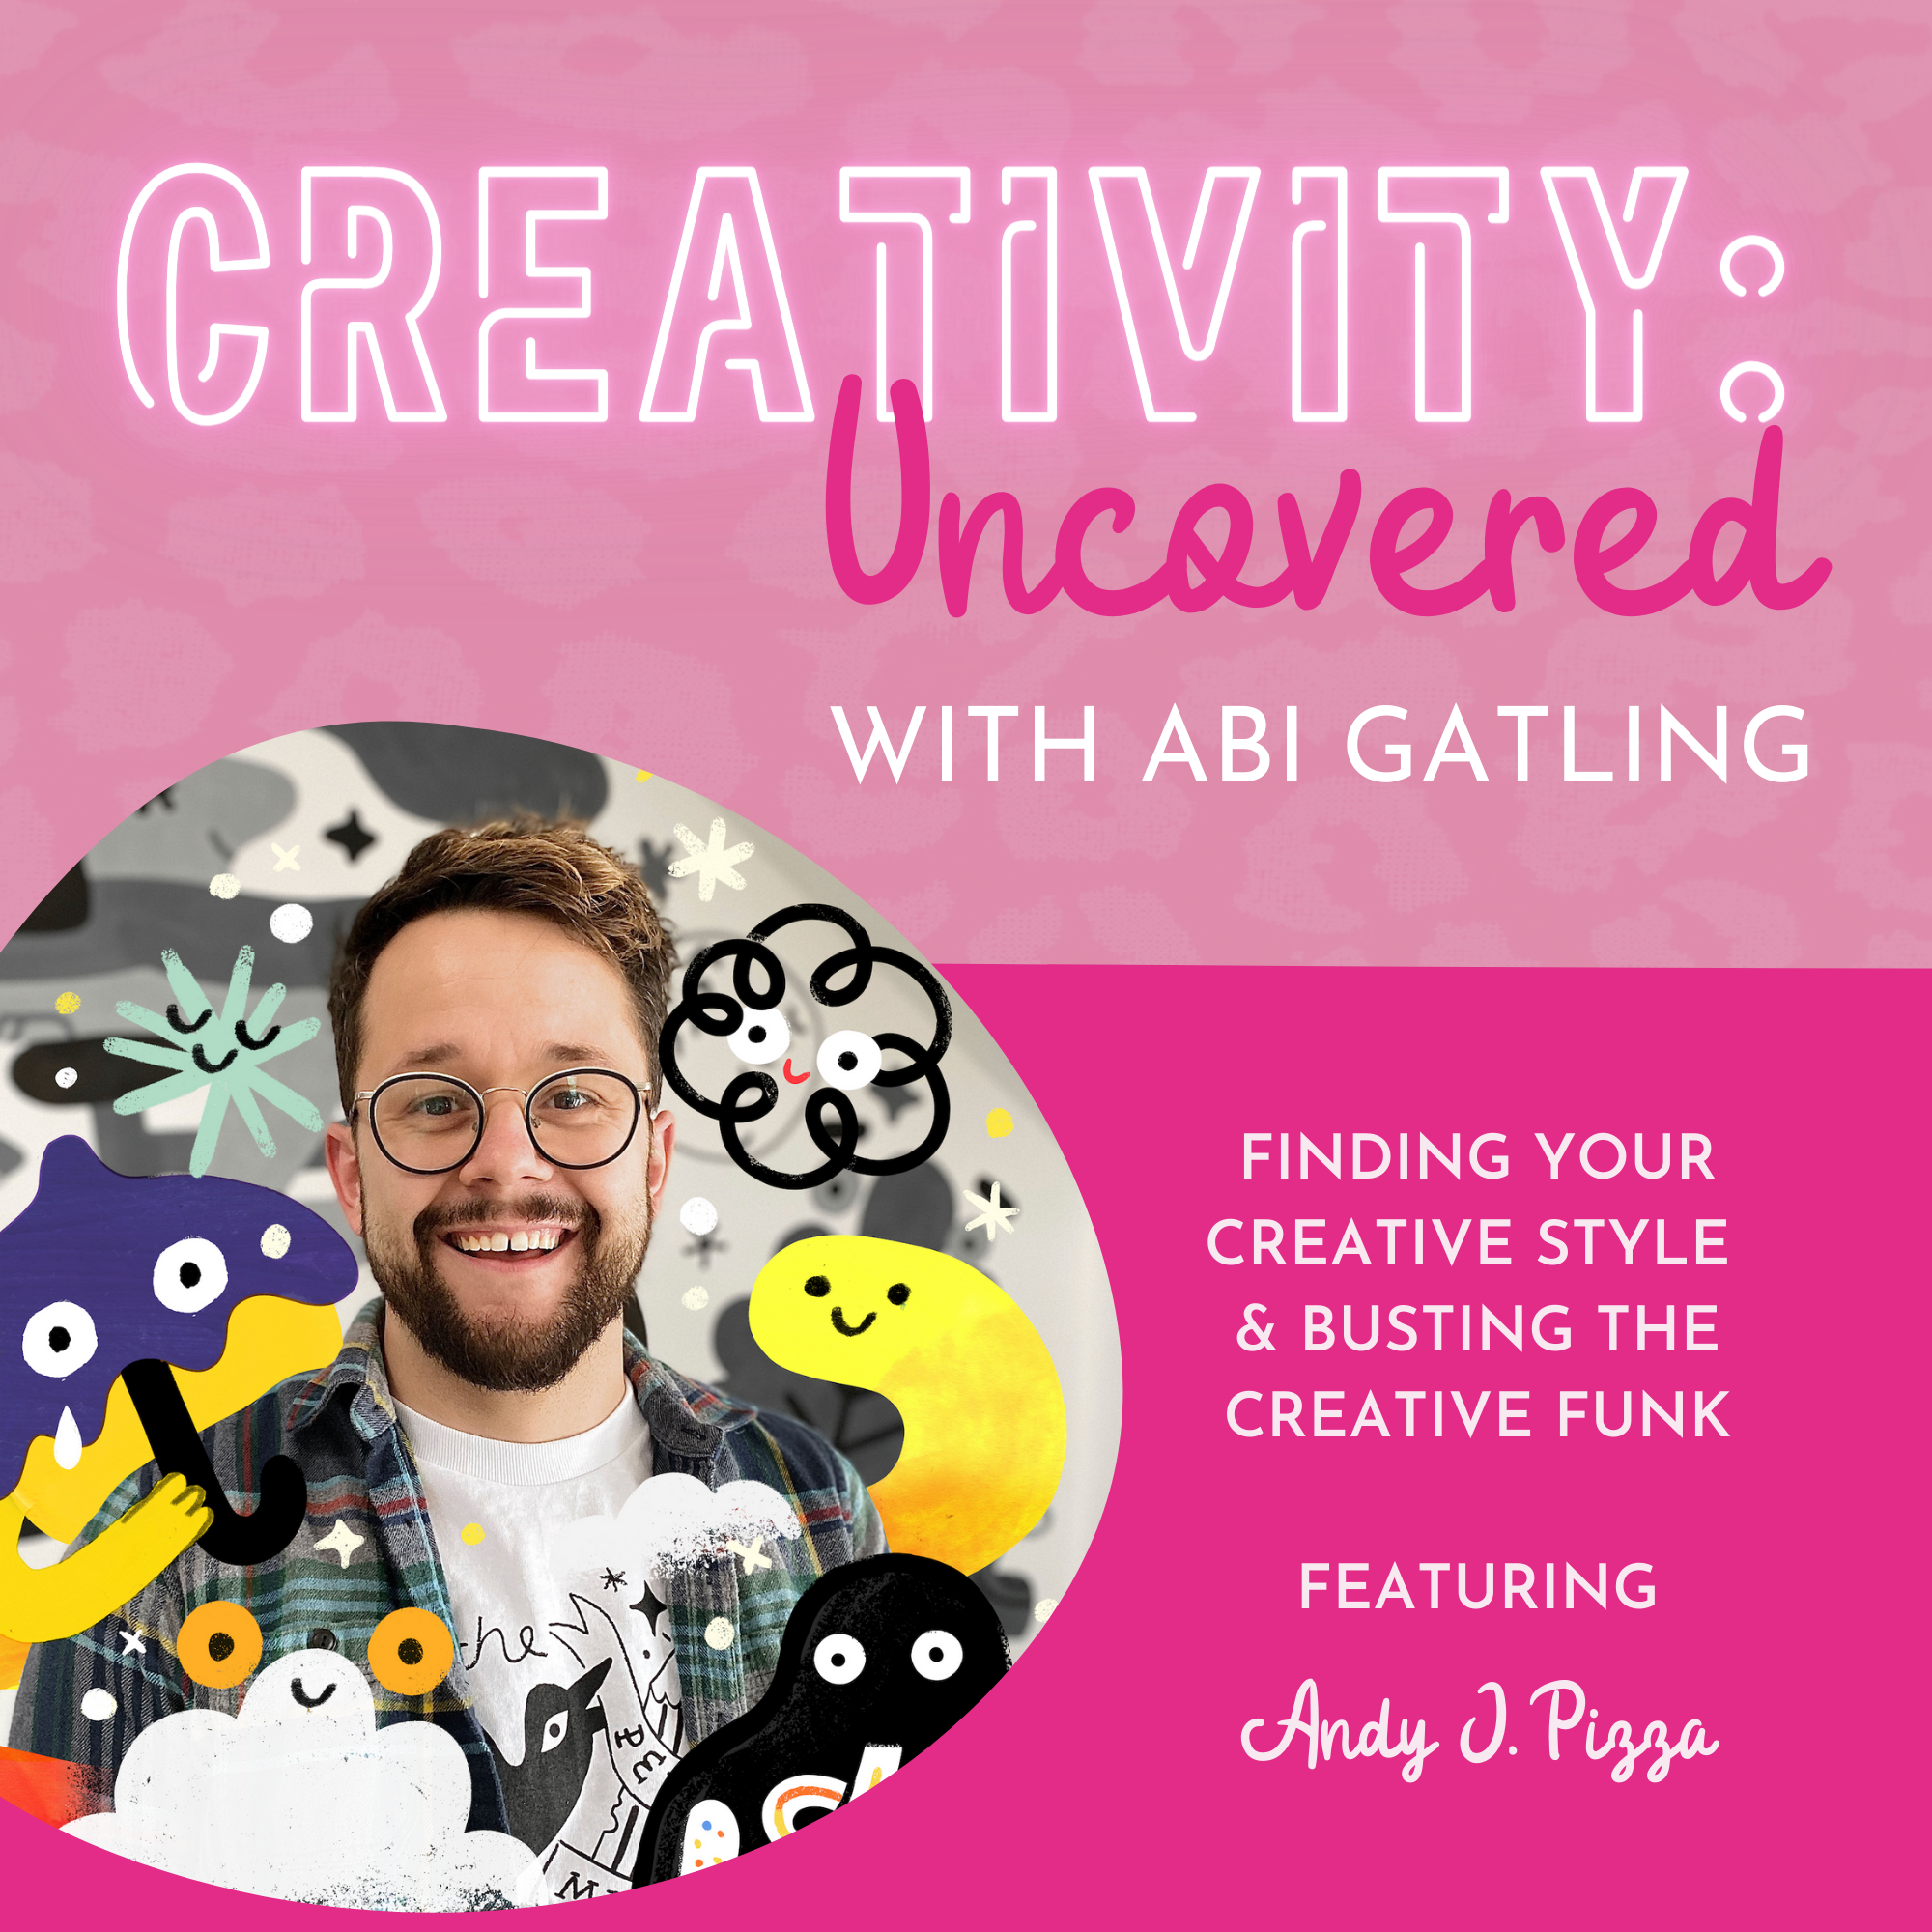 Creativity: Uncovered podcast episode graphic featuring guest Andy J. Pizza